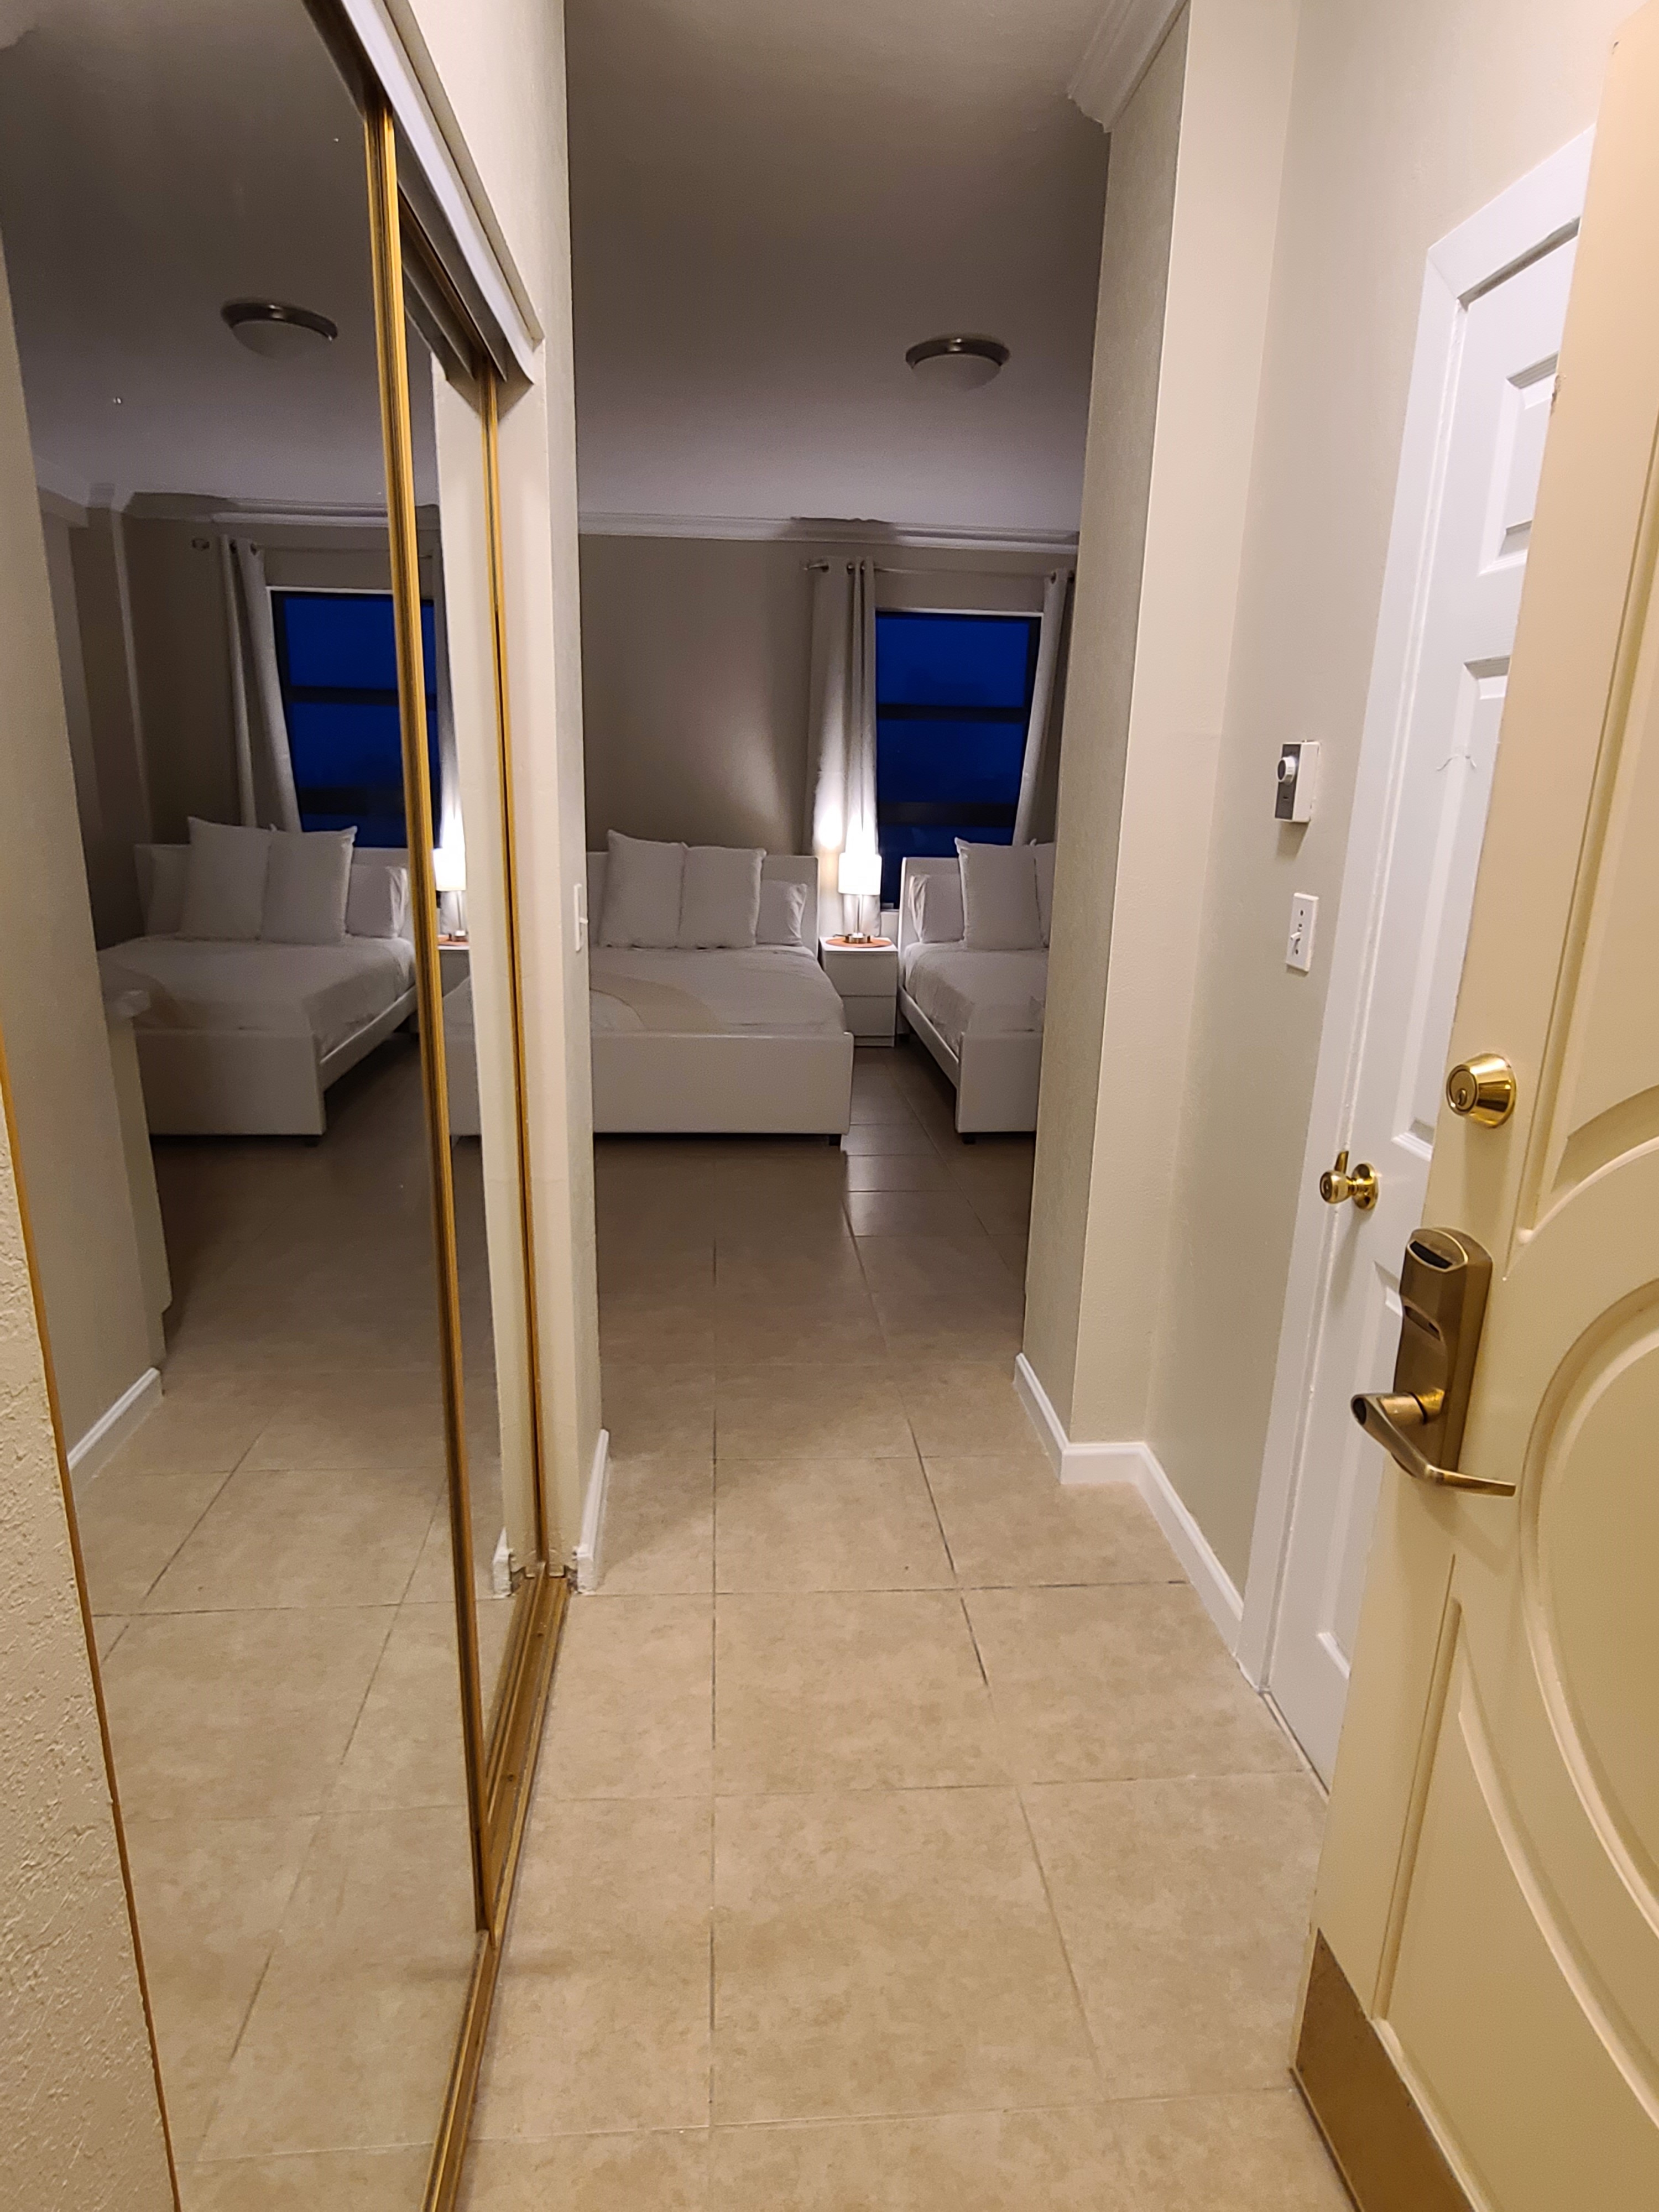 Hollywood Beach Resort Hotel Studio, Unit #408 - Apartments for Rent in